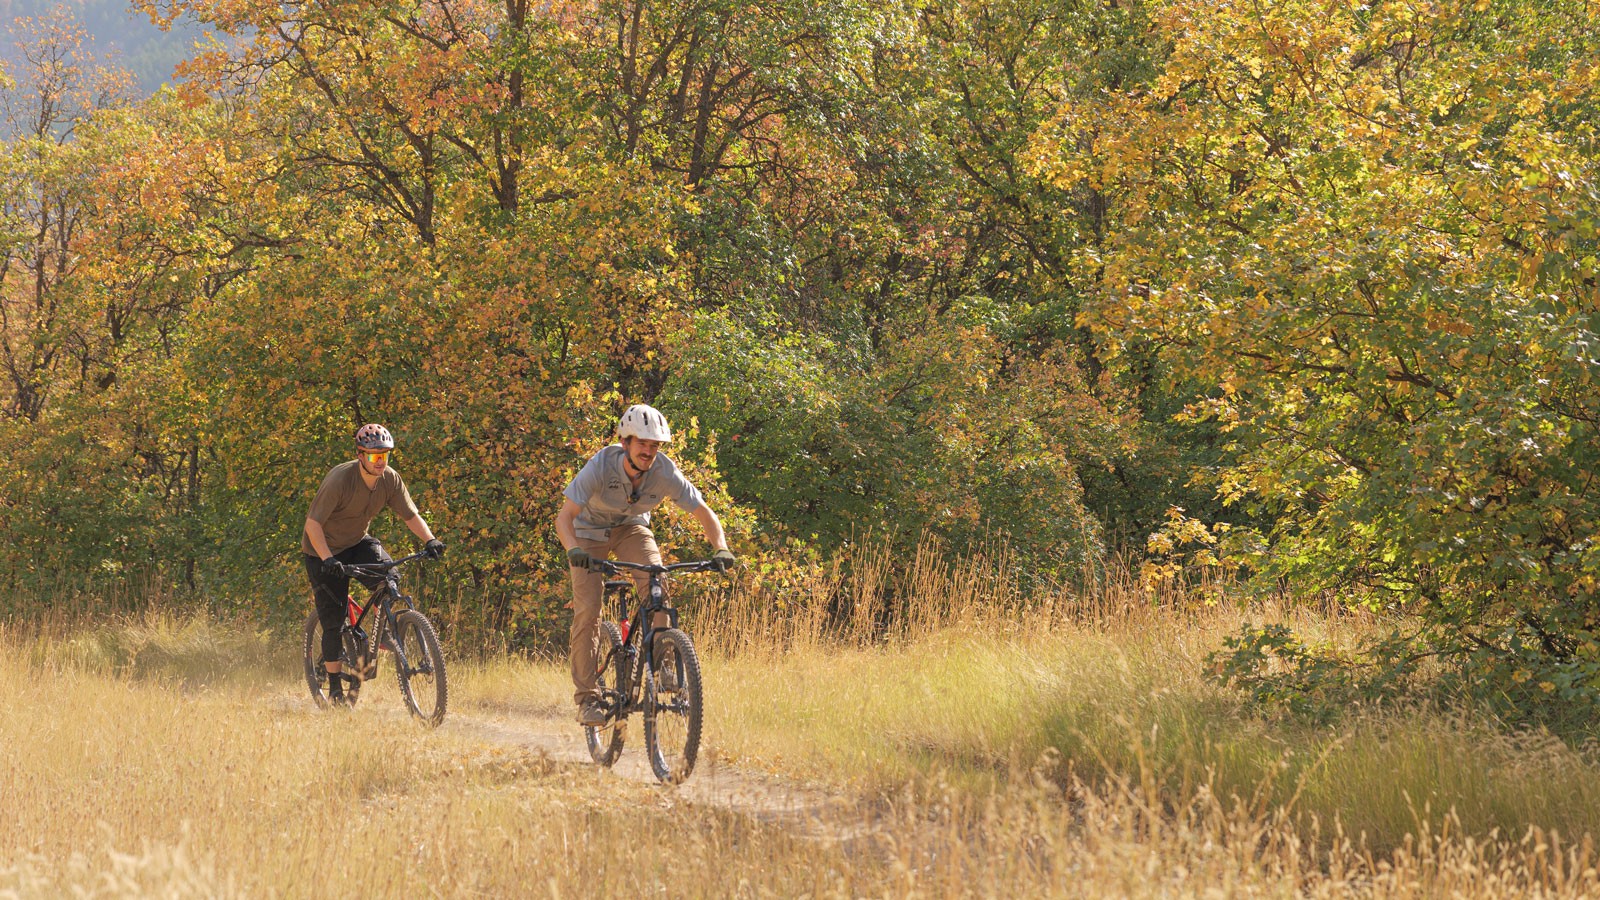 Two bicyclists sporting helmets and gloves peddle down a trail through a grassy field next to yellow-leaved trees.